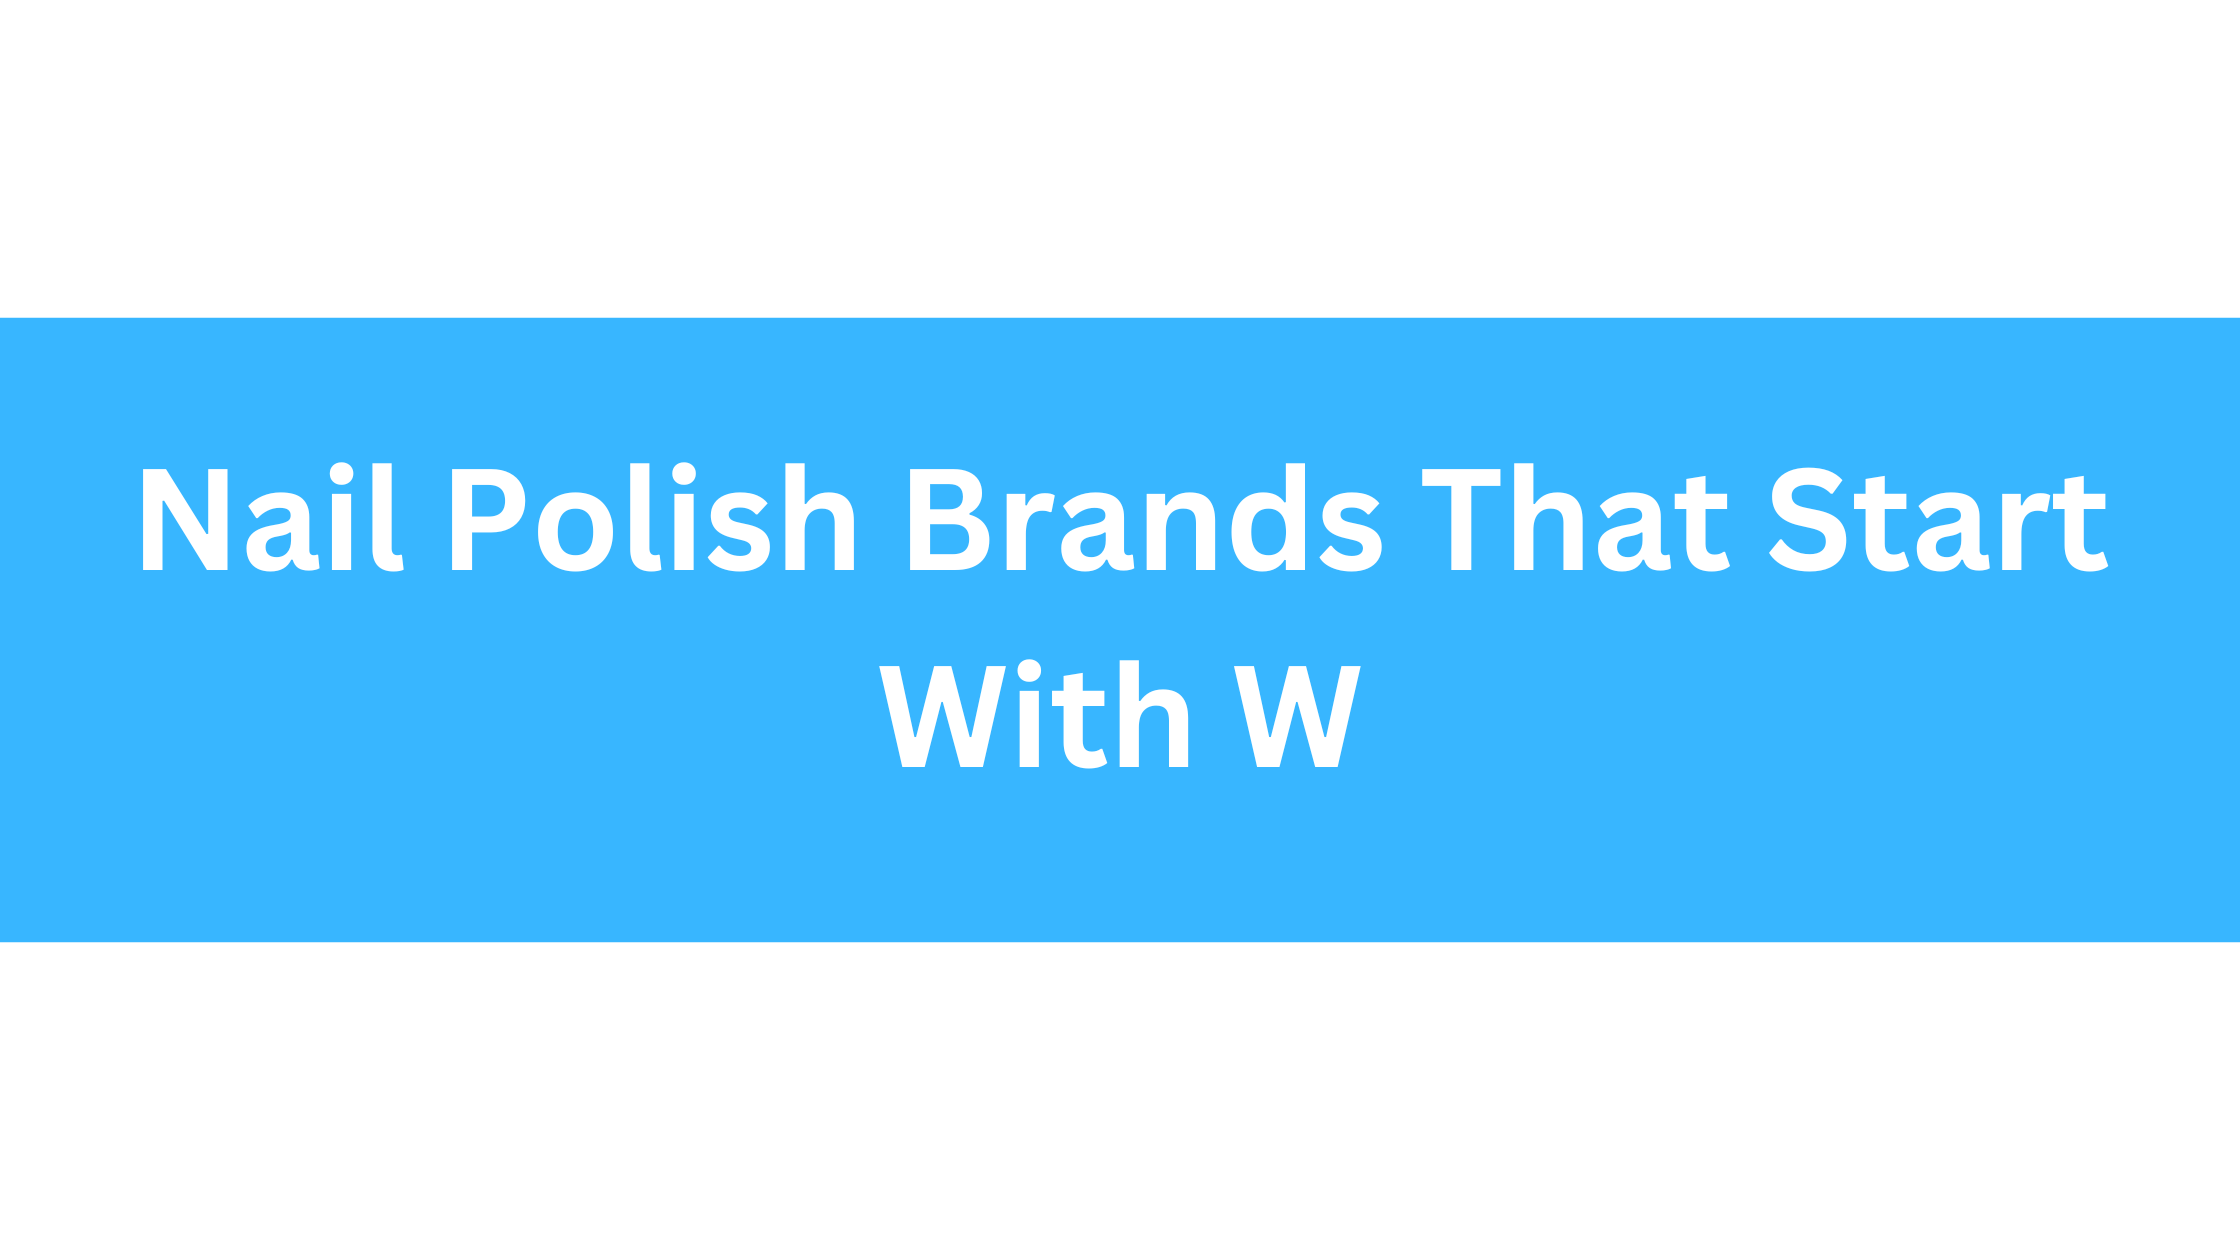 Nail Polish Brands That Start With W